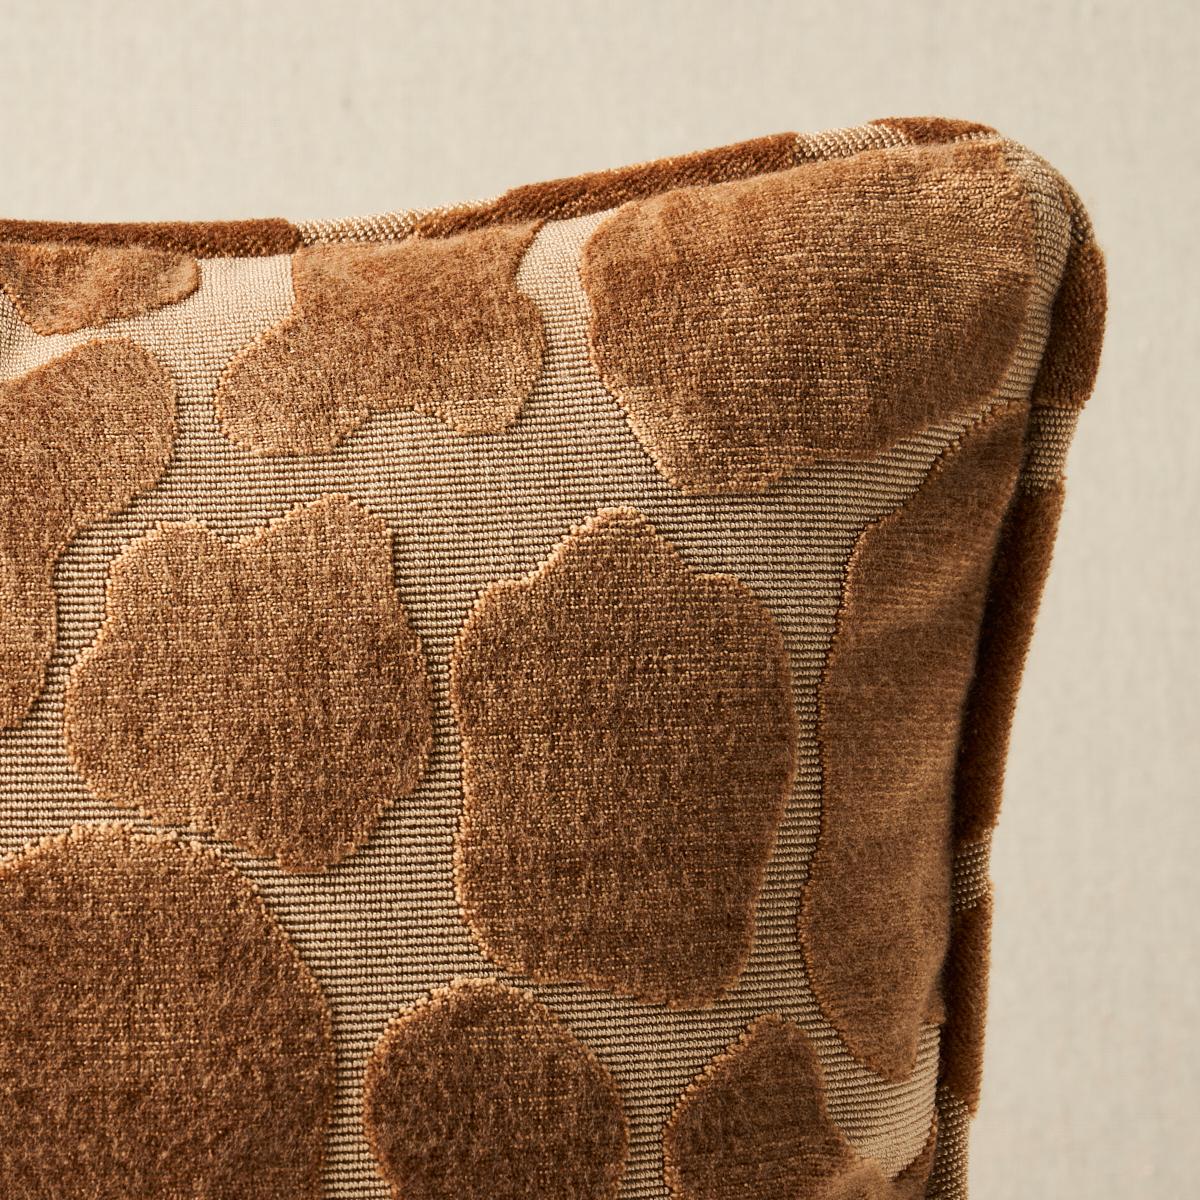 This pillow features Giraffe Velvet with a self welt finish. A beloved design that we revived due to popular demand, Giraffe Velvet in safari is an abstracted animal pattern created with a cut pile and loop construction. Pillow includes a